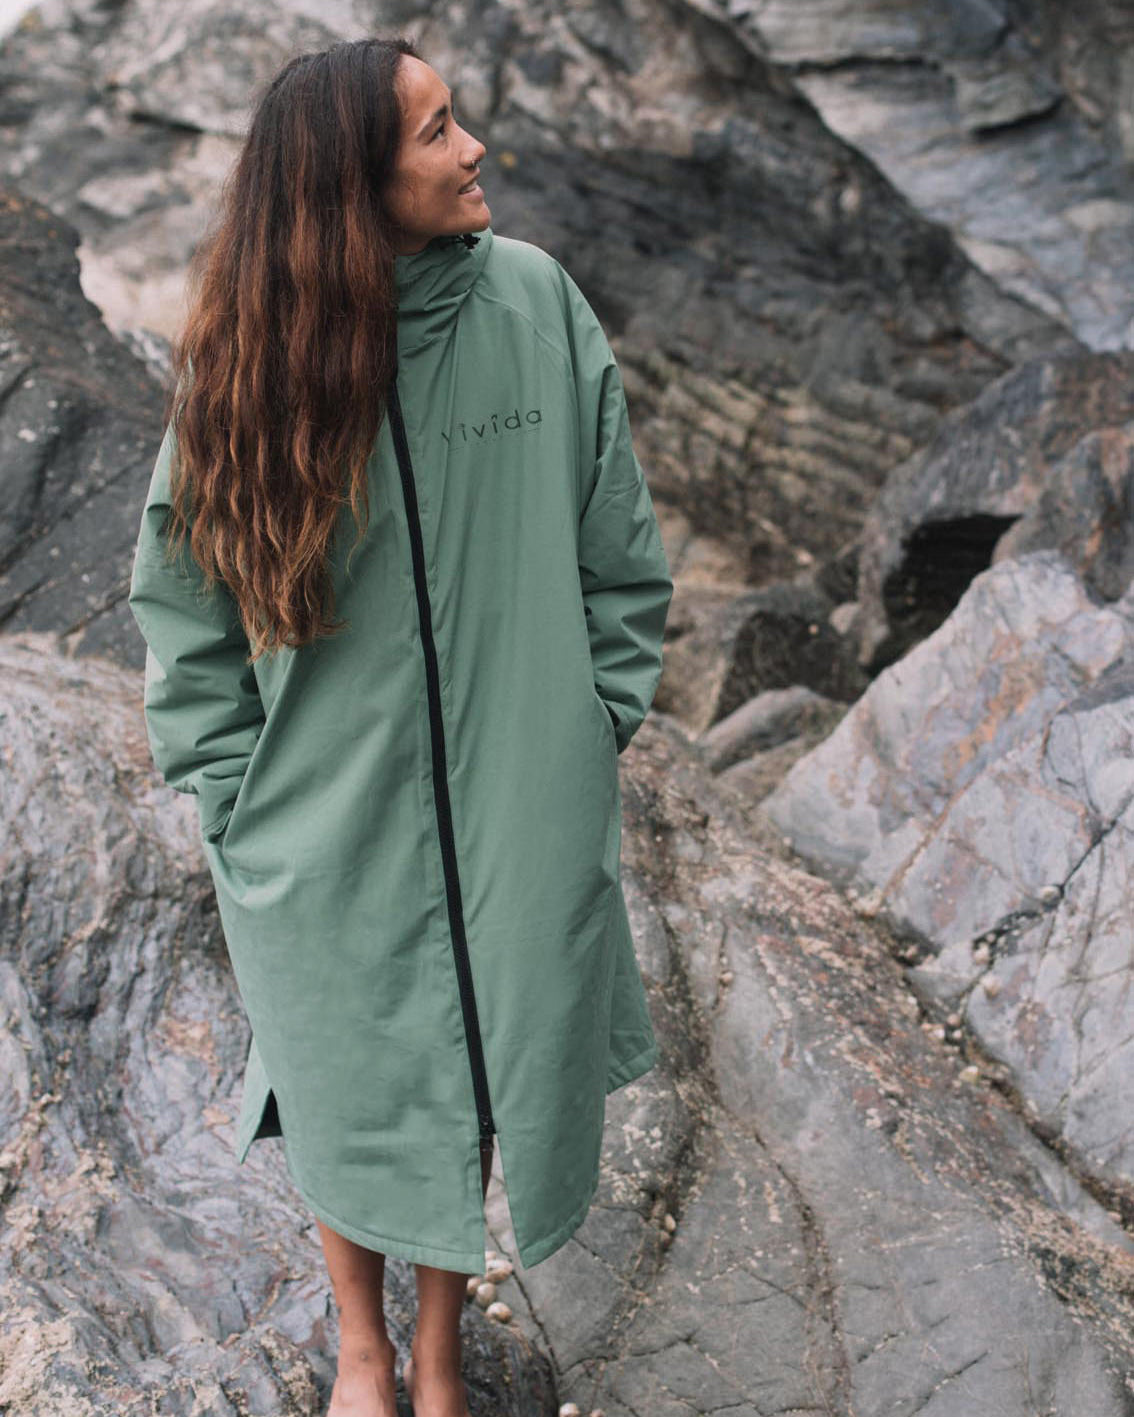 Weatherproof changing robes - Eco Kit Review – Outdoor Swimming